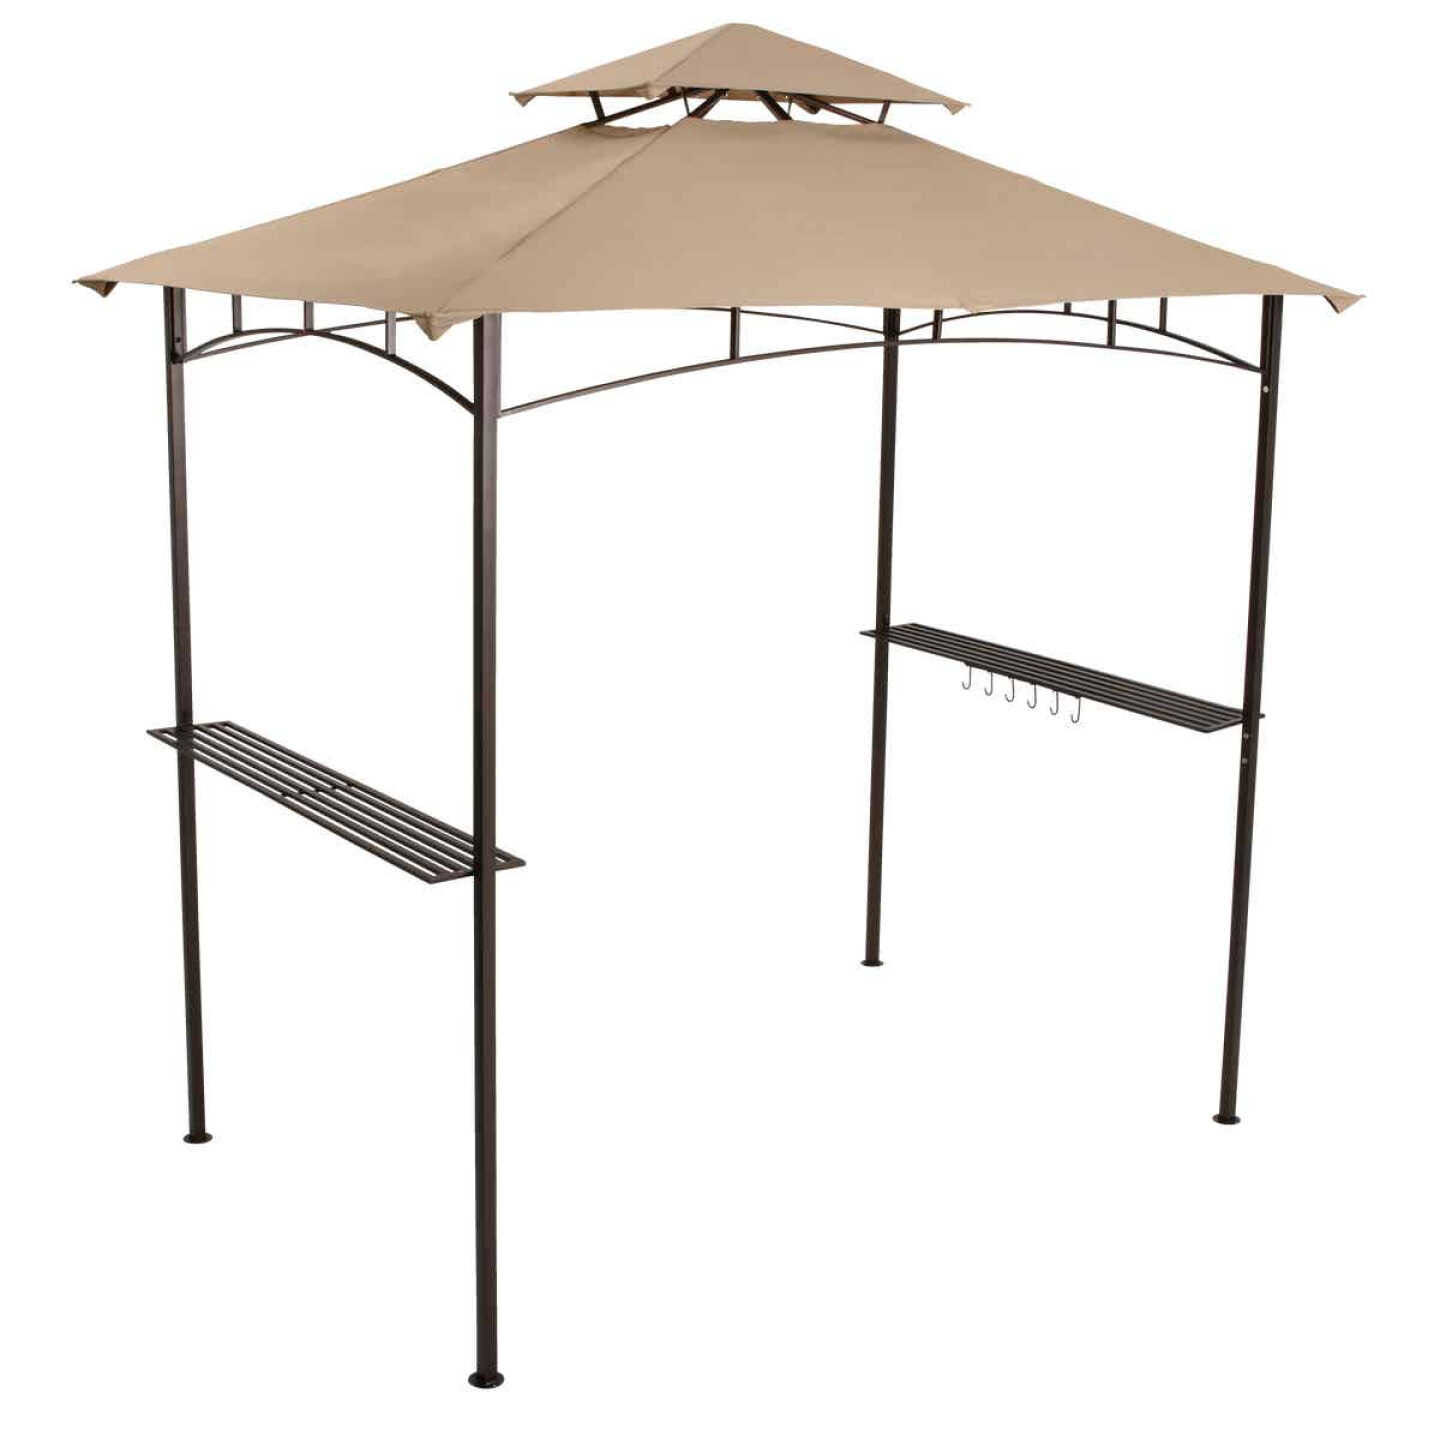 Replacement Canopy for TJSG-093-5 Grill Gazebo - Riplock 350